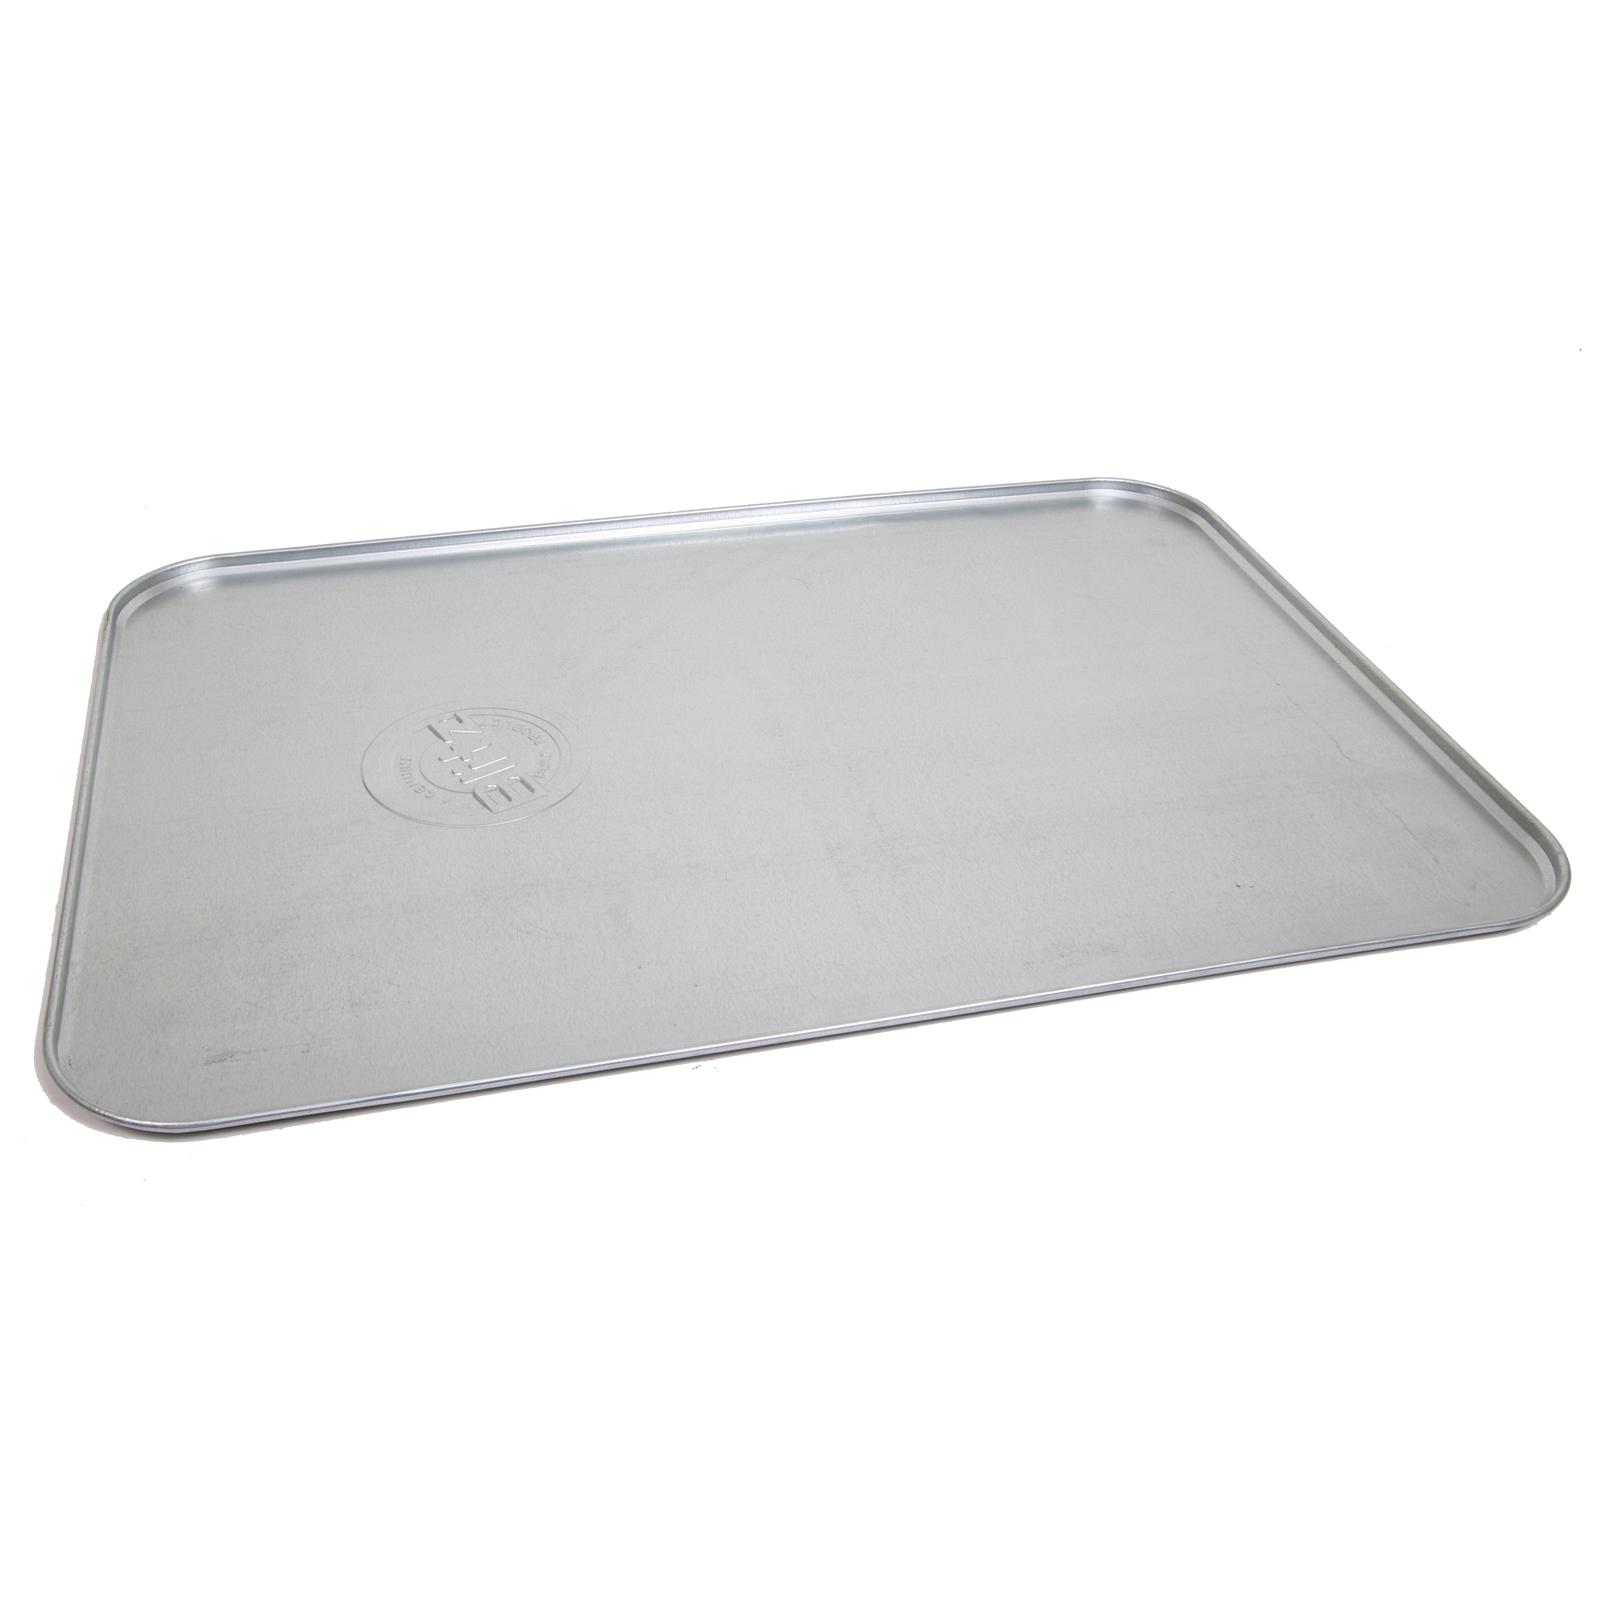 Hopkins Flo Tool 11430 Oil Drip Tray 25 x 36, Galvanized Metal Oil Drip  Pans for Sale